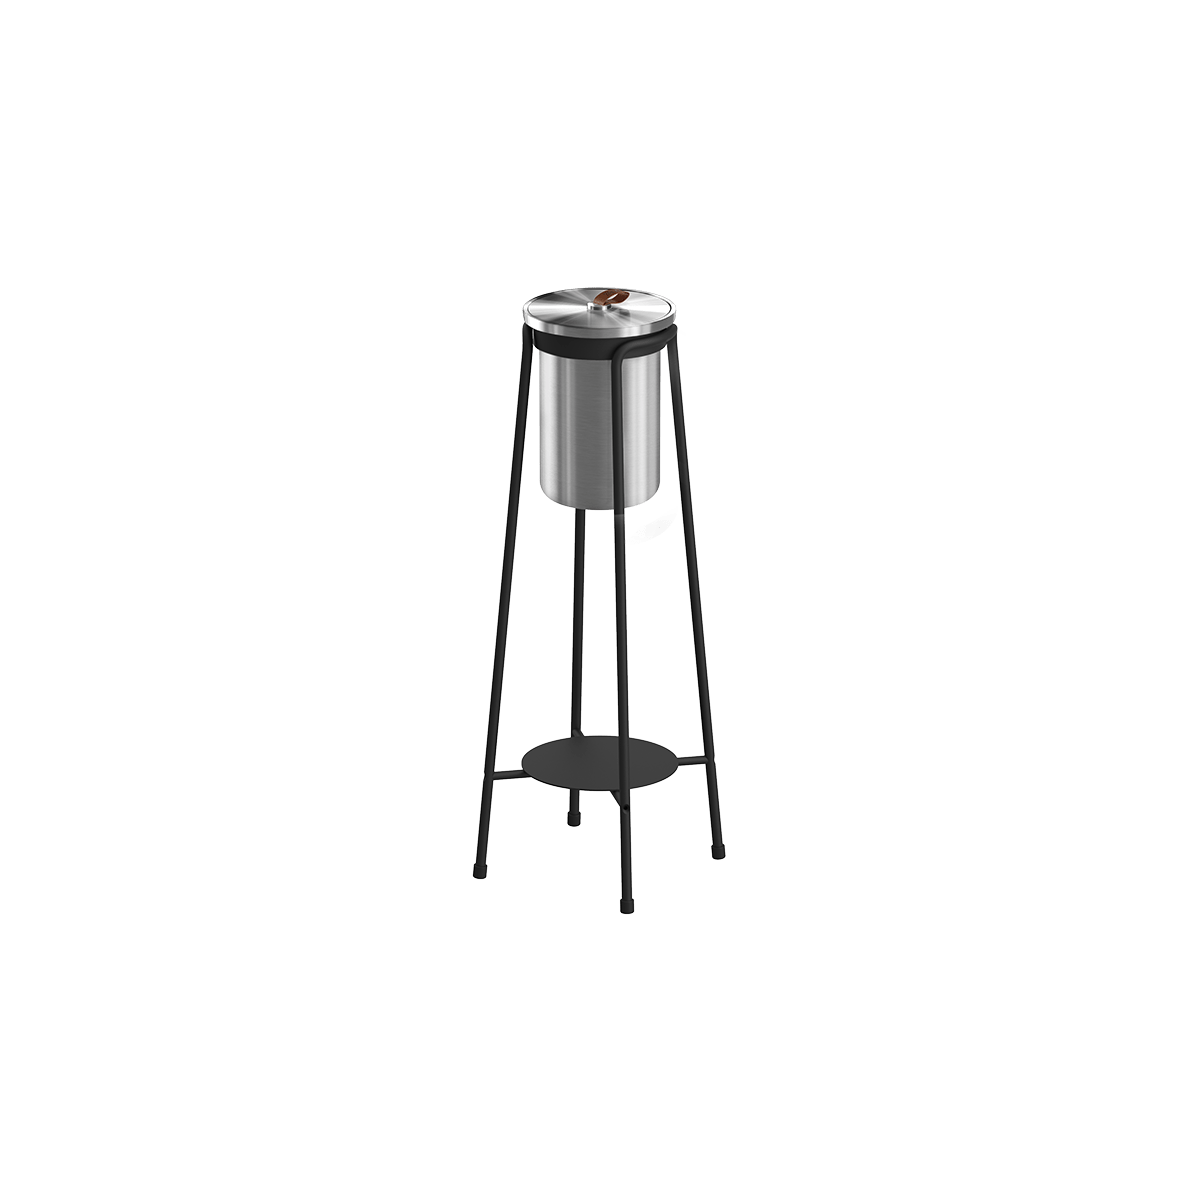 variant_8583609% | Patio Accessory Stand Ø14 + Wine Cooler - Stainless steel | SACKit